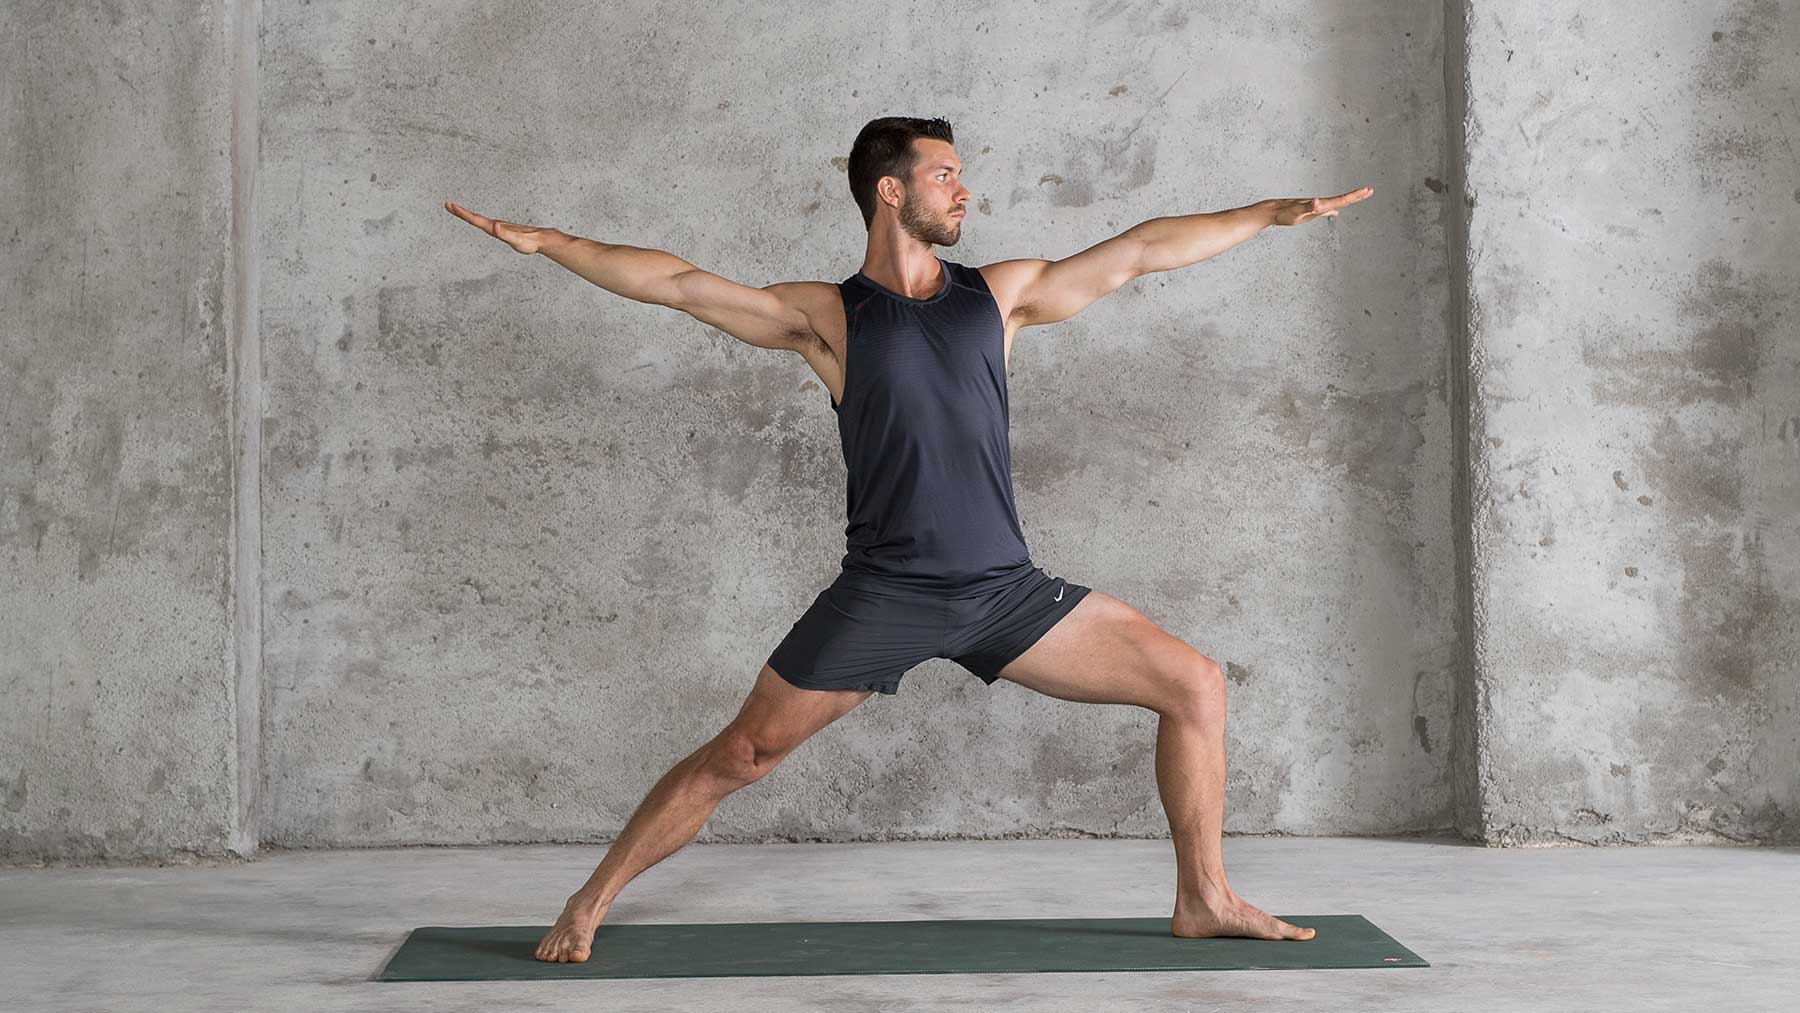 The impacts of yoga on the wellbeing of men